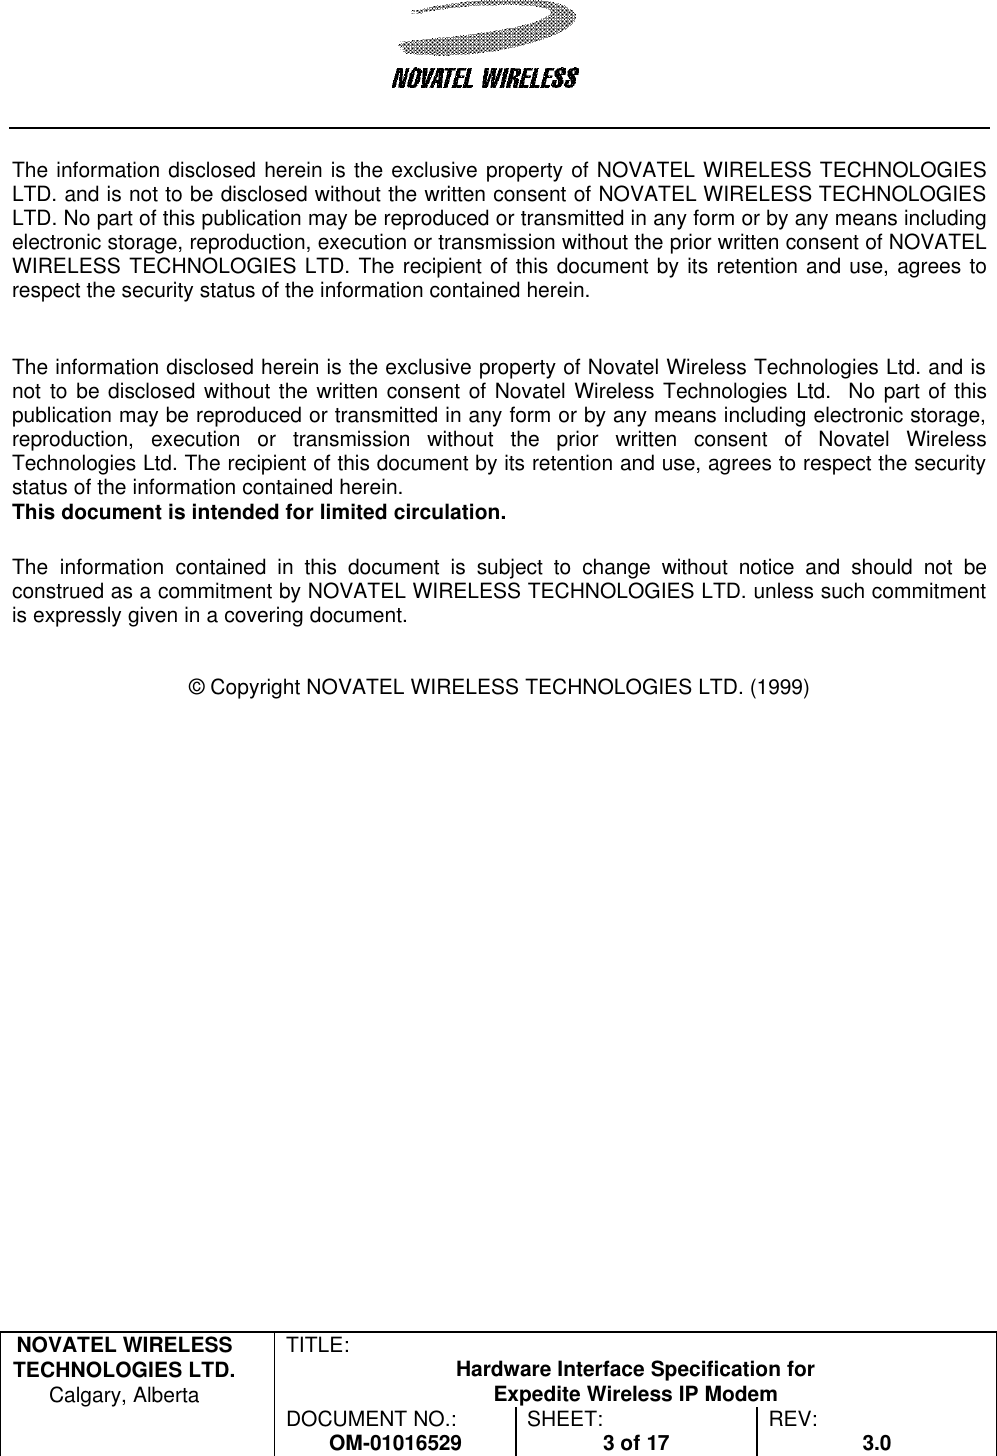   NOVATEL WIRELESS TECHNOLOGIES LTD.  Calgary, Alberta TITLE: Hardware Interface Specification for Expedite Wireless IP Modem  DOCUMENT NO.: OM-01016529 SHEET: 3 of 17 REV: 3.0    The information disclosed herein is the exclusive property of NOVATEL WIRELESS TECHNOLOGIES LTD. and is not to be disclosed without the written consent of NOVATEL WIRELESS TECHNOLOGIES LTD. No part of this publication may be reproduced or transmitted in any form or by any means including electronic storage, reproduction, execution or transmission without the prior written consent of NOVATEL WIRELESS TECHNOLOGIES LTD. The recipient of this document by its retention and use, agrees to respect the security status of the information contained herein.   The information disclosed herein is the exclusive property of Novatel Wireless Technologies Ltd. and is not to be disclosed without the written consent of Novatel Wireless Technologies Ltd.  No part of this publication may be reproduced or transmitted in any form or by any means including electronic storage, reproduction, execution or transmission without the prior written consent of Novatel Wireless Technologies Ltd. The recipient of this document by its retention and use, agrees to respect the security status of the information contained herein. This document is intended for limited circulation.  The information contained in this document is subject to change without notice and should not be construed as a commitment by NOVATEL WIRELESS TECHNOLOGIES LTD. unless such commitment is expressly given in a covering document.   © Copyright NOVATEL WIRELESS TECHNOLOGIES LTD. (1999) 